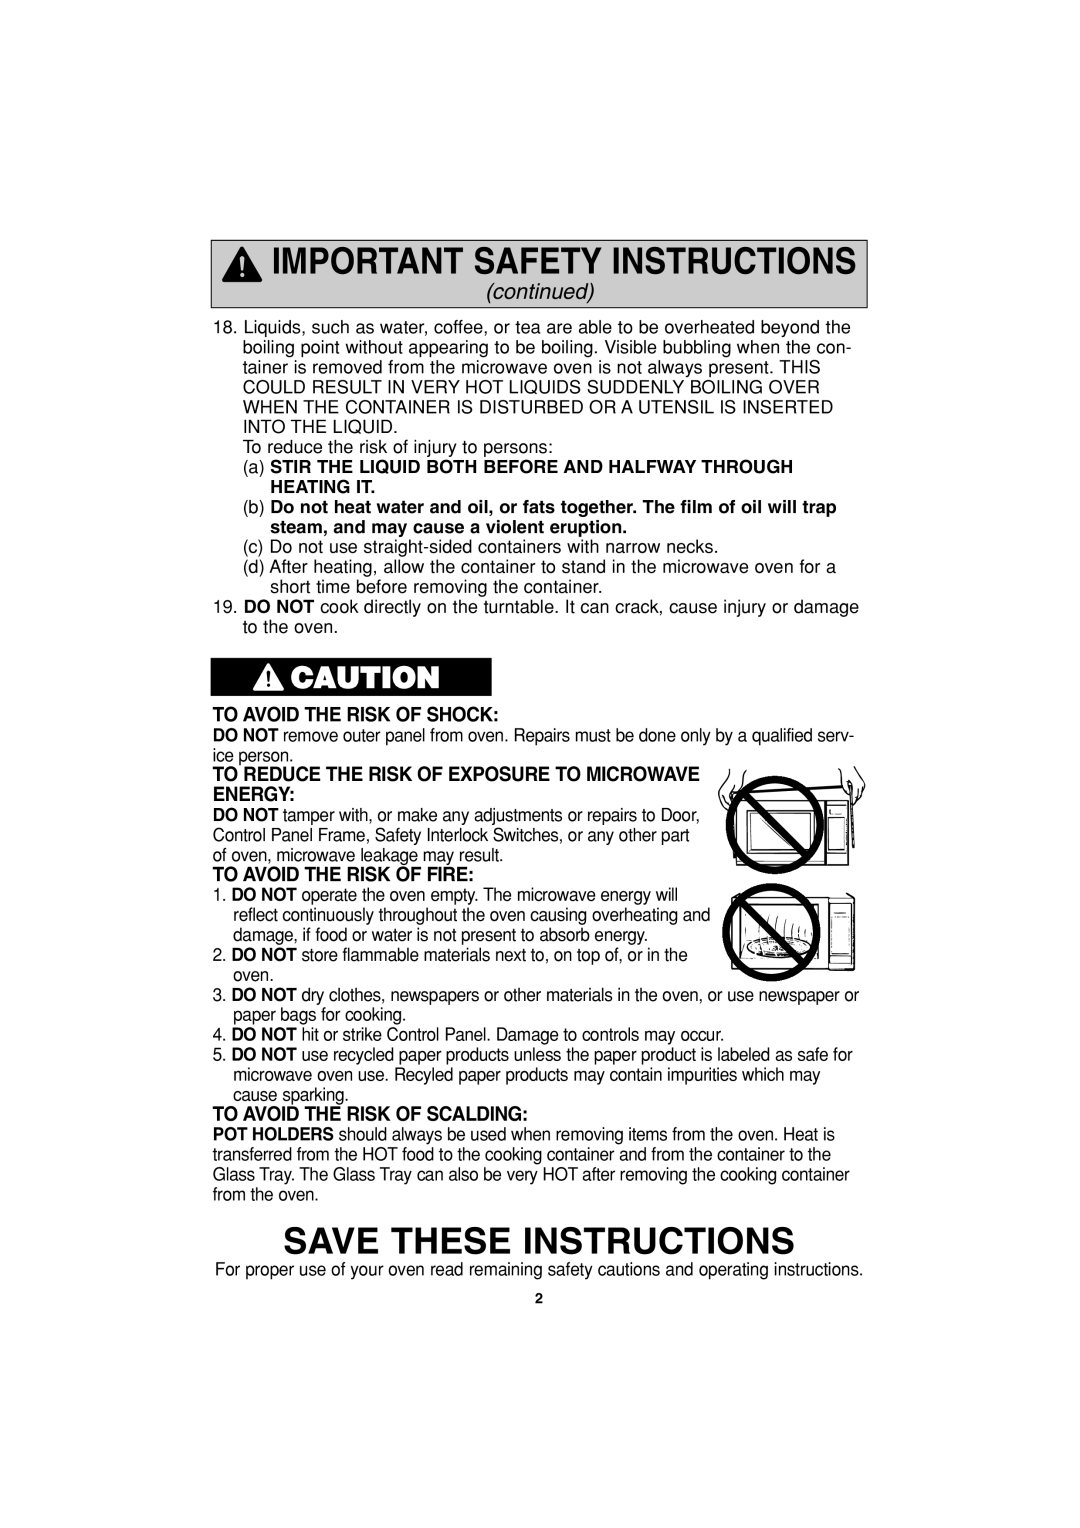 Panasonic NN-S943 Save These Instructions, continued, To Avoid The Risk Of Shock, Energy, To Avoid The Risk Of Fire 